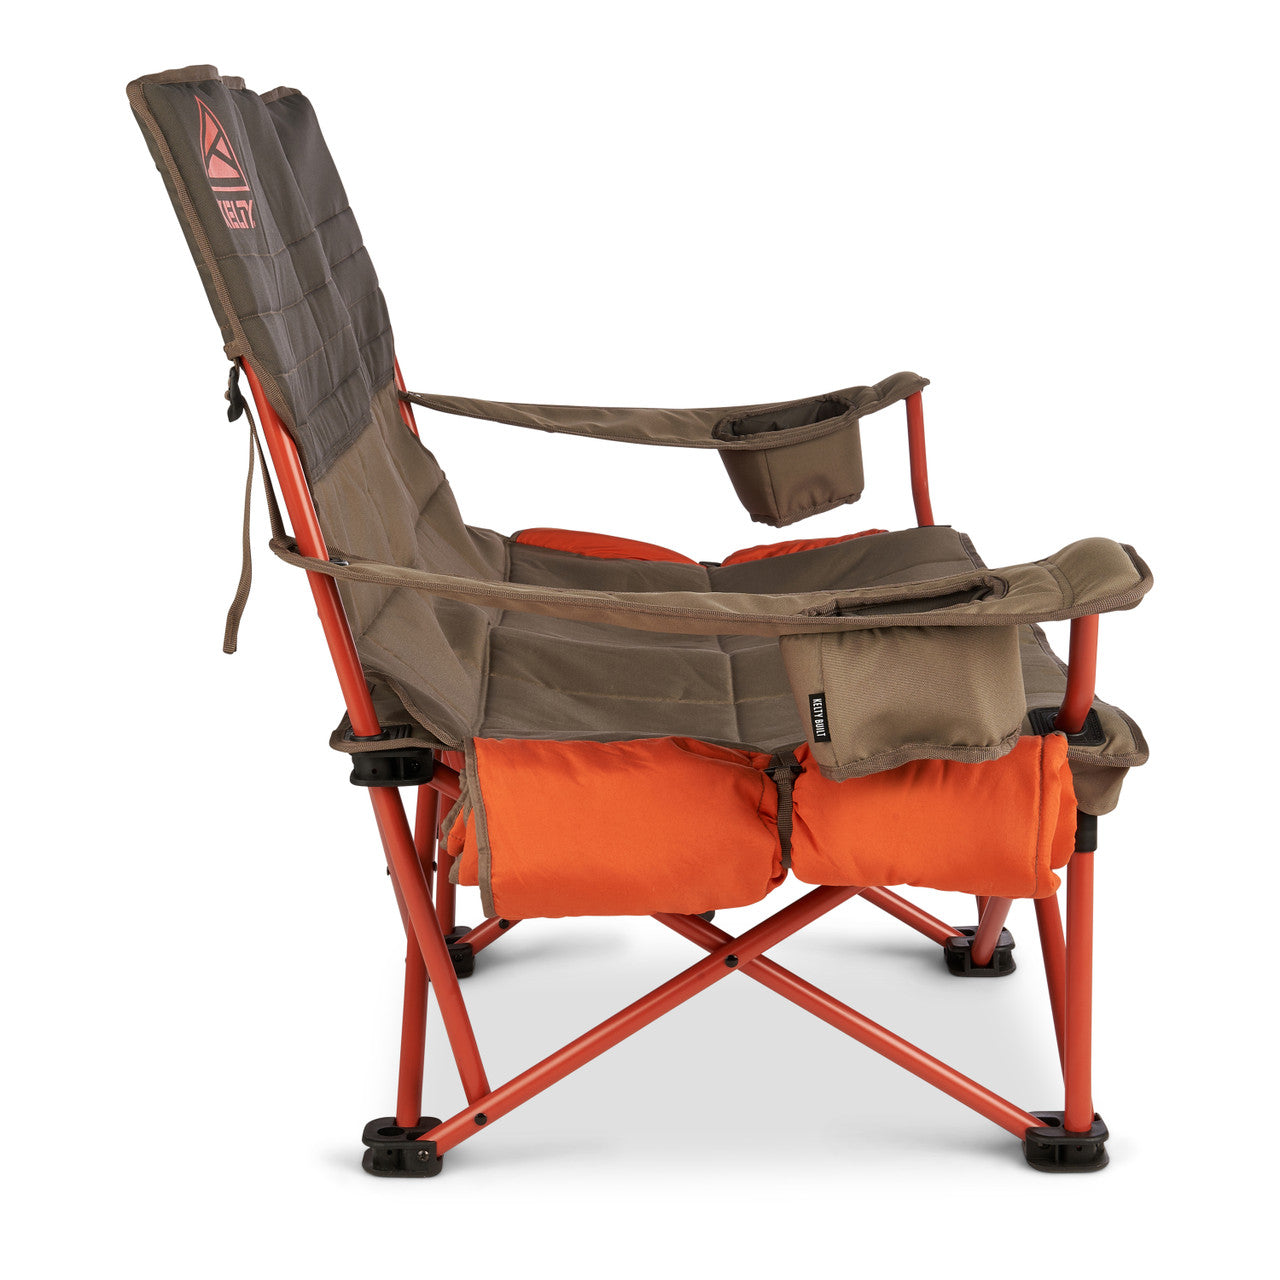 A Kelty camping chair with orange and brown straps.